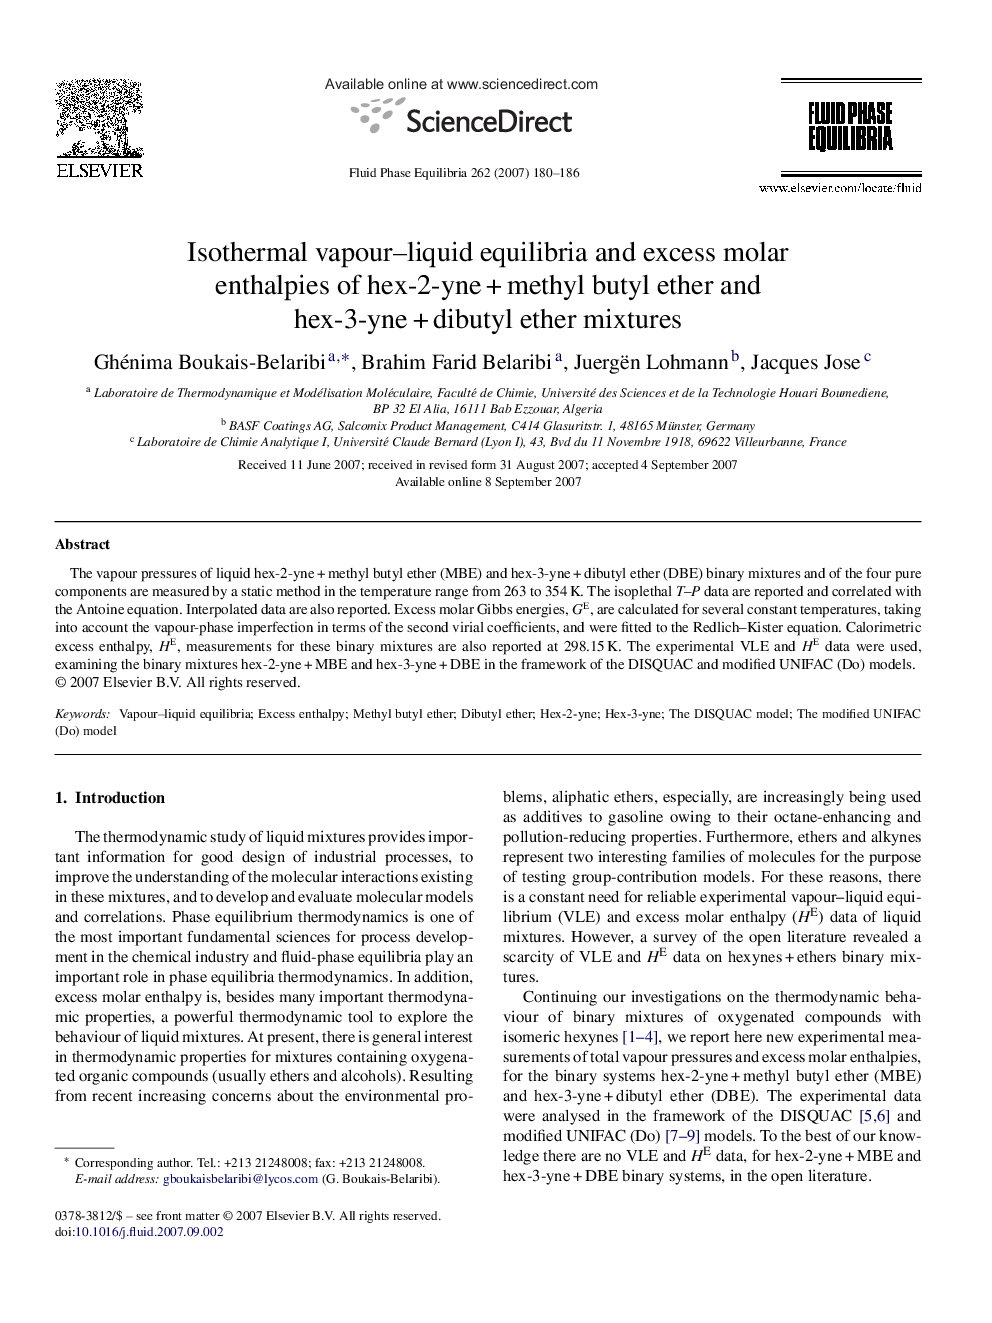 Isothermal vapour–liquid equilibria and excess molar enthalpies of hex-2-yne + methyl butyl ether and hex-3-yne + dibutyl ether mixtures